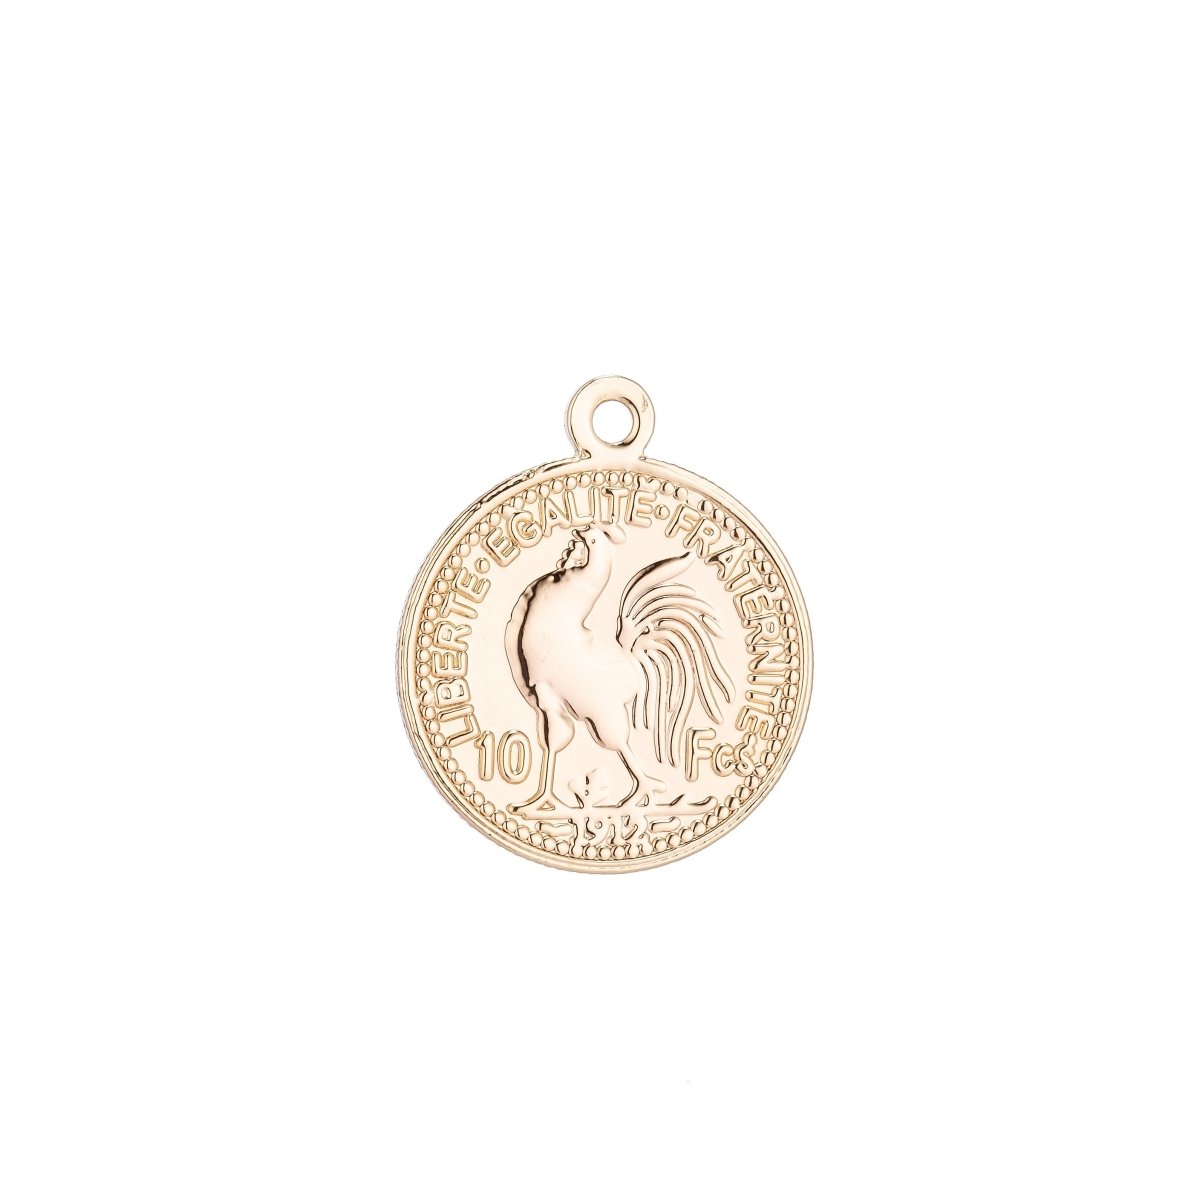 18K Gold Filled 10 Francs Marianne Rooster Gold Coin French Coin Charm Pendant for Layer Necklace Bracelet Earring Jewelry Making Supply, CHGF-105/C-89 - DLUXCA